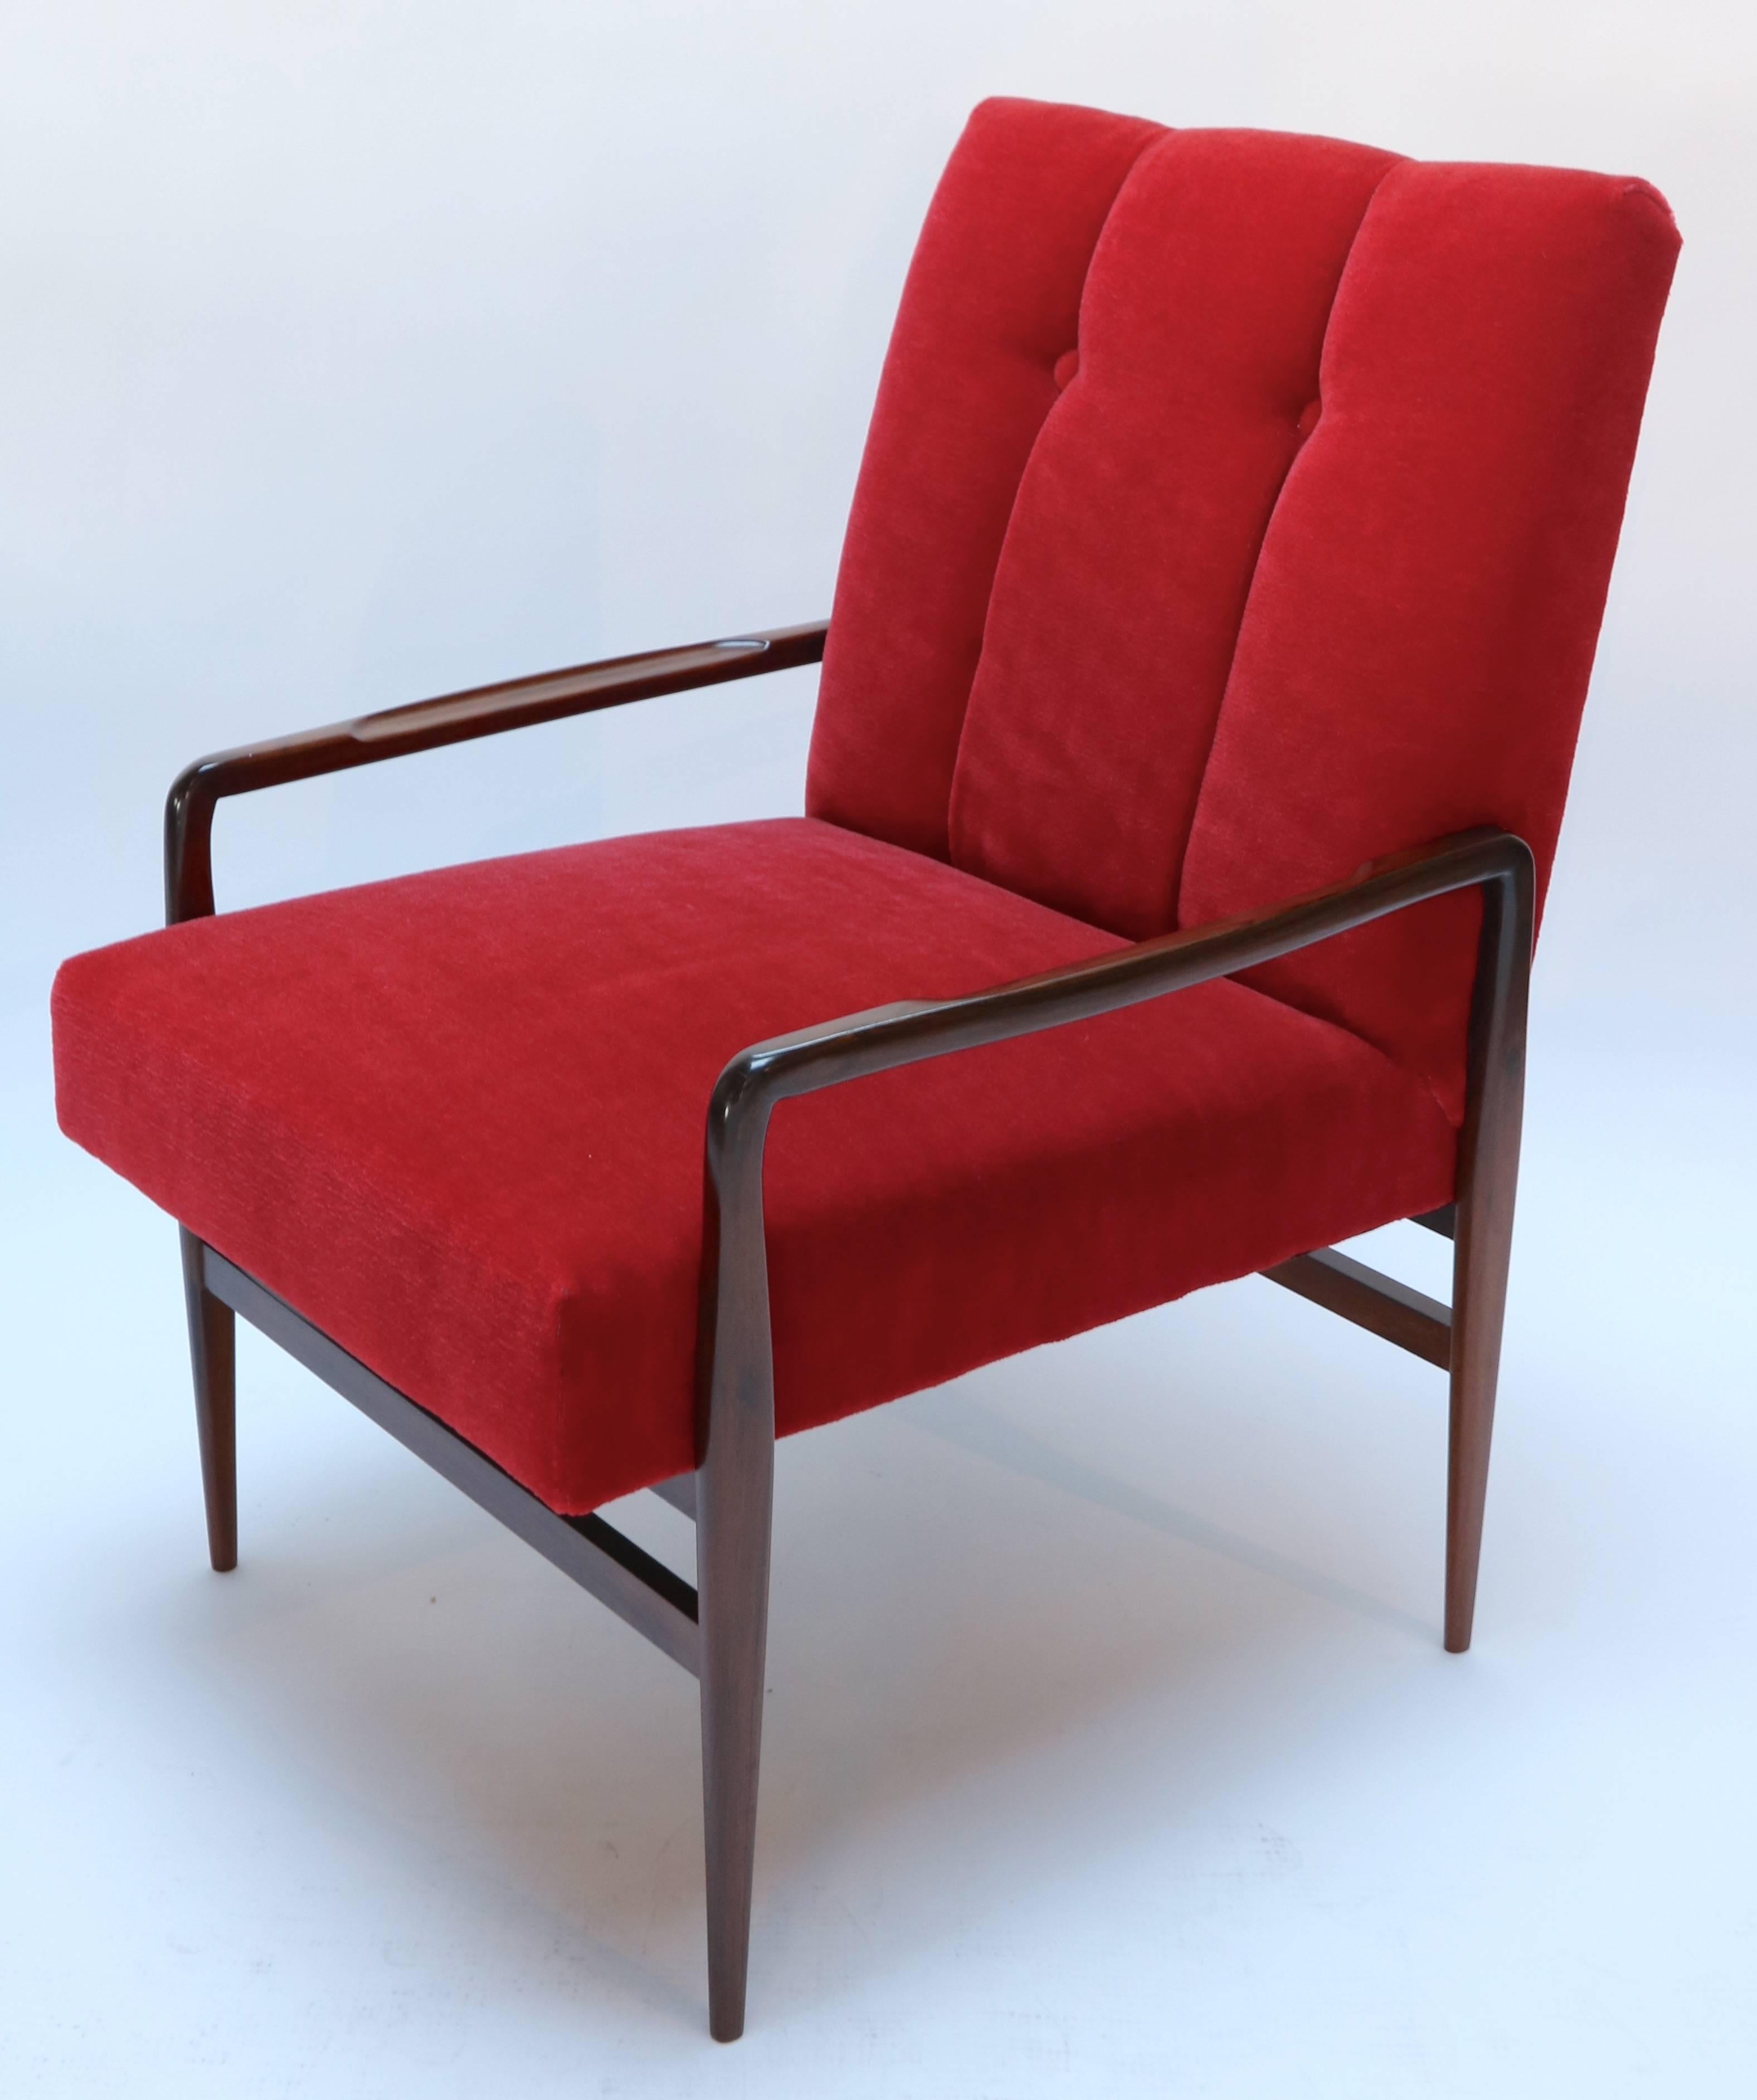 Pair of 1960s Brazilian Jacaranda Wood Armchairs in Red Mohair In Good Condition For Sale In Los Angeles, CA